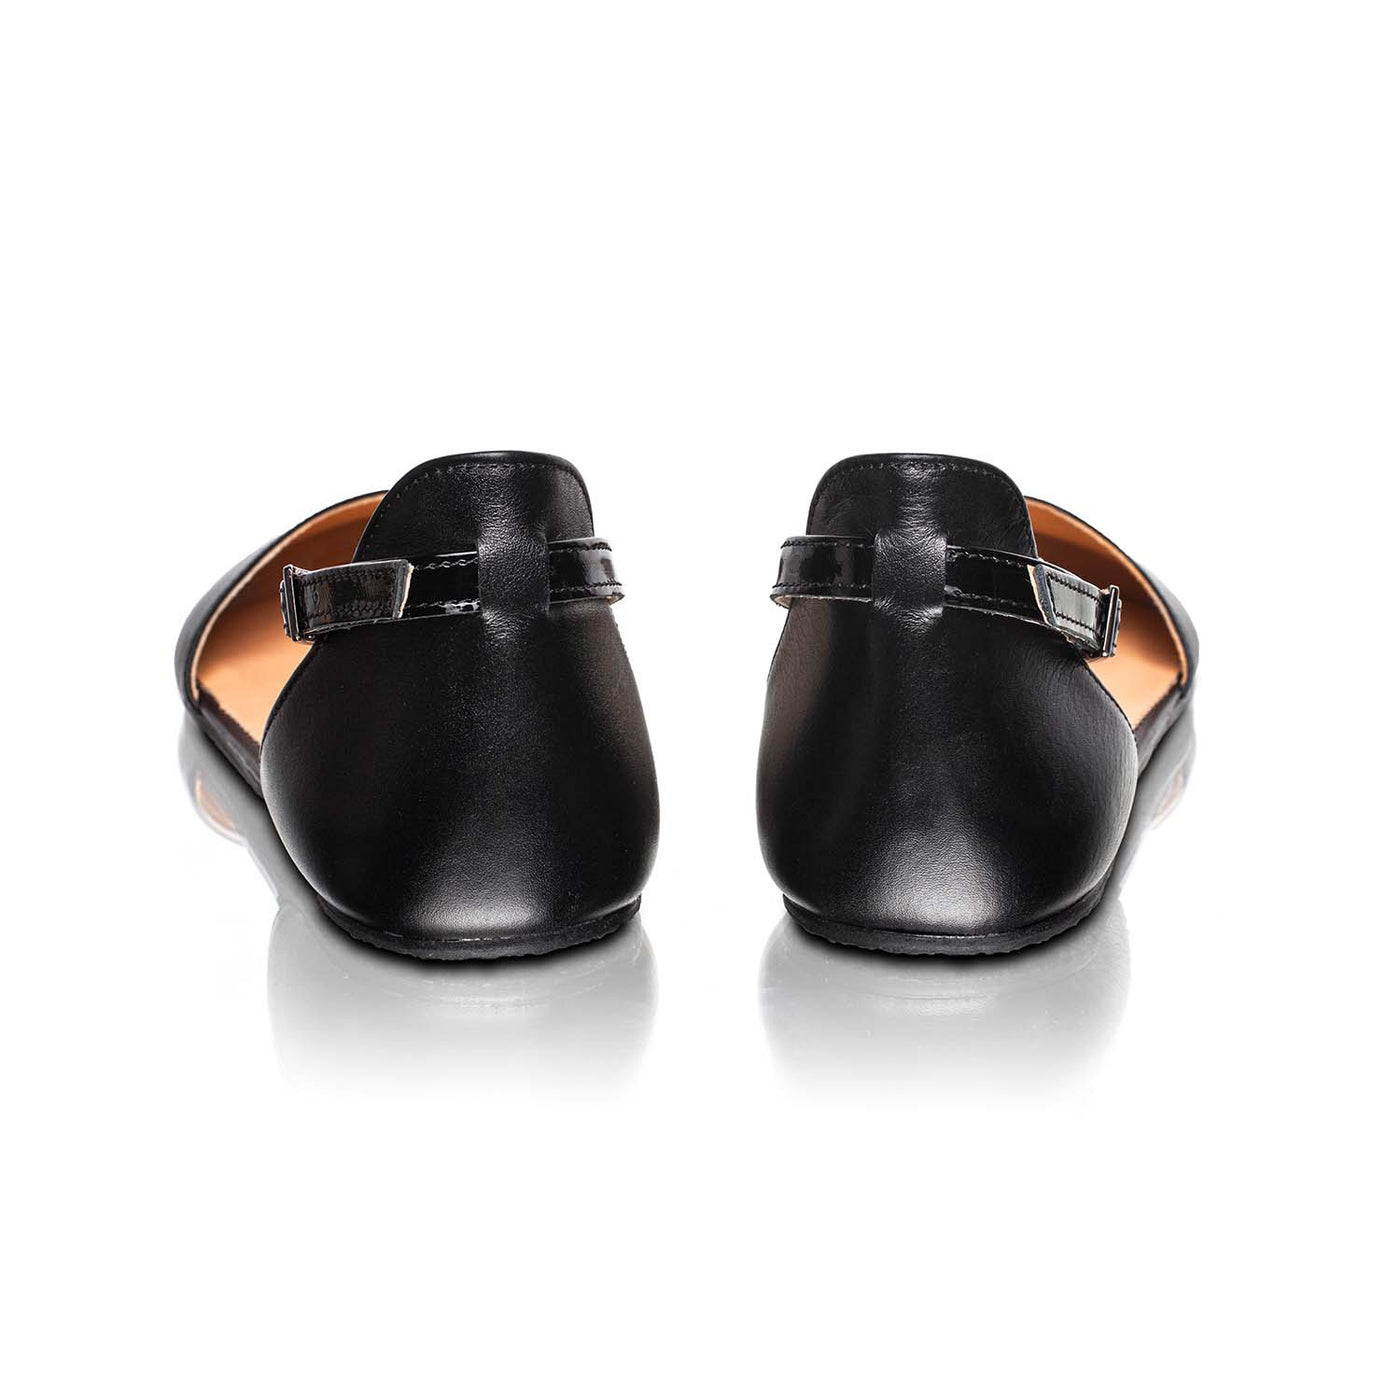 A photo of Shapen Poppy D’orsay dressy flats with a leather upper and rubber soles. The flats are a black color with a heel cup and dainty ankle strap, the inside of the sole are a beige color. Both flats are shown from the back against a white background. #color_black